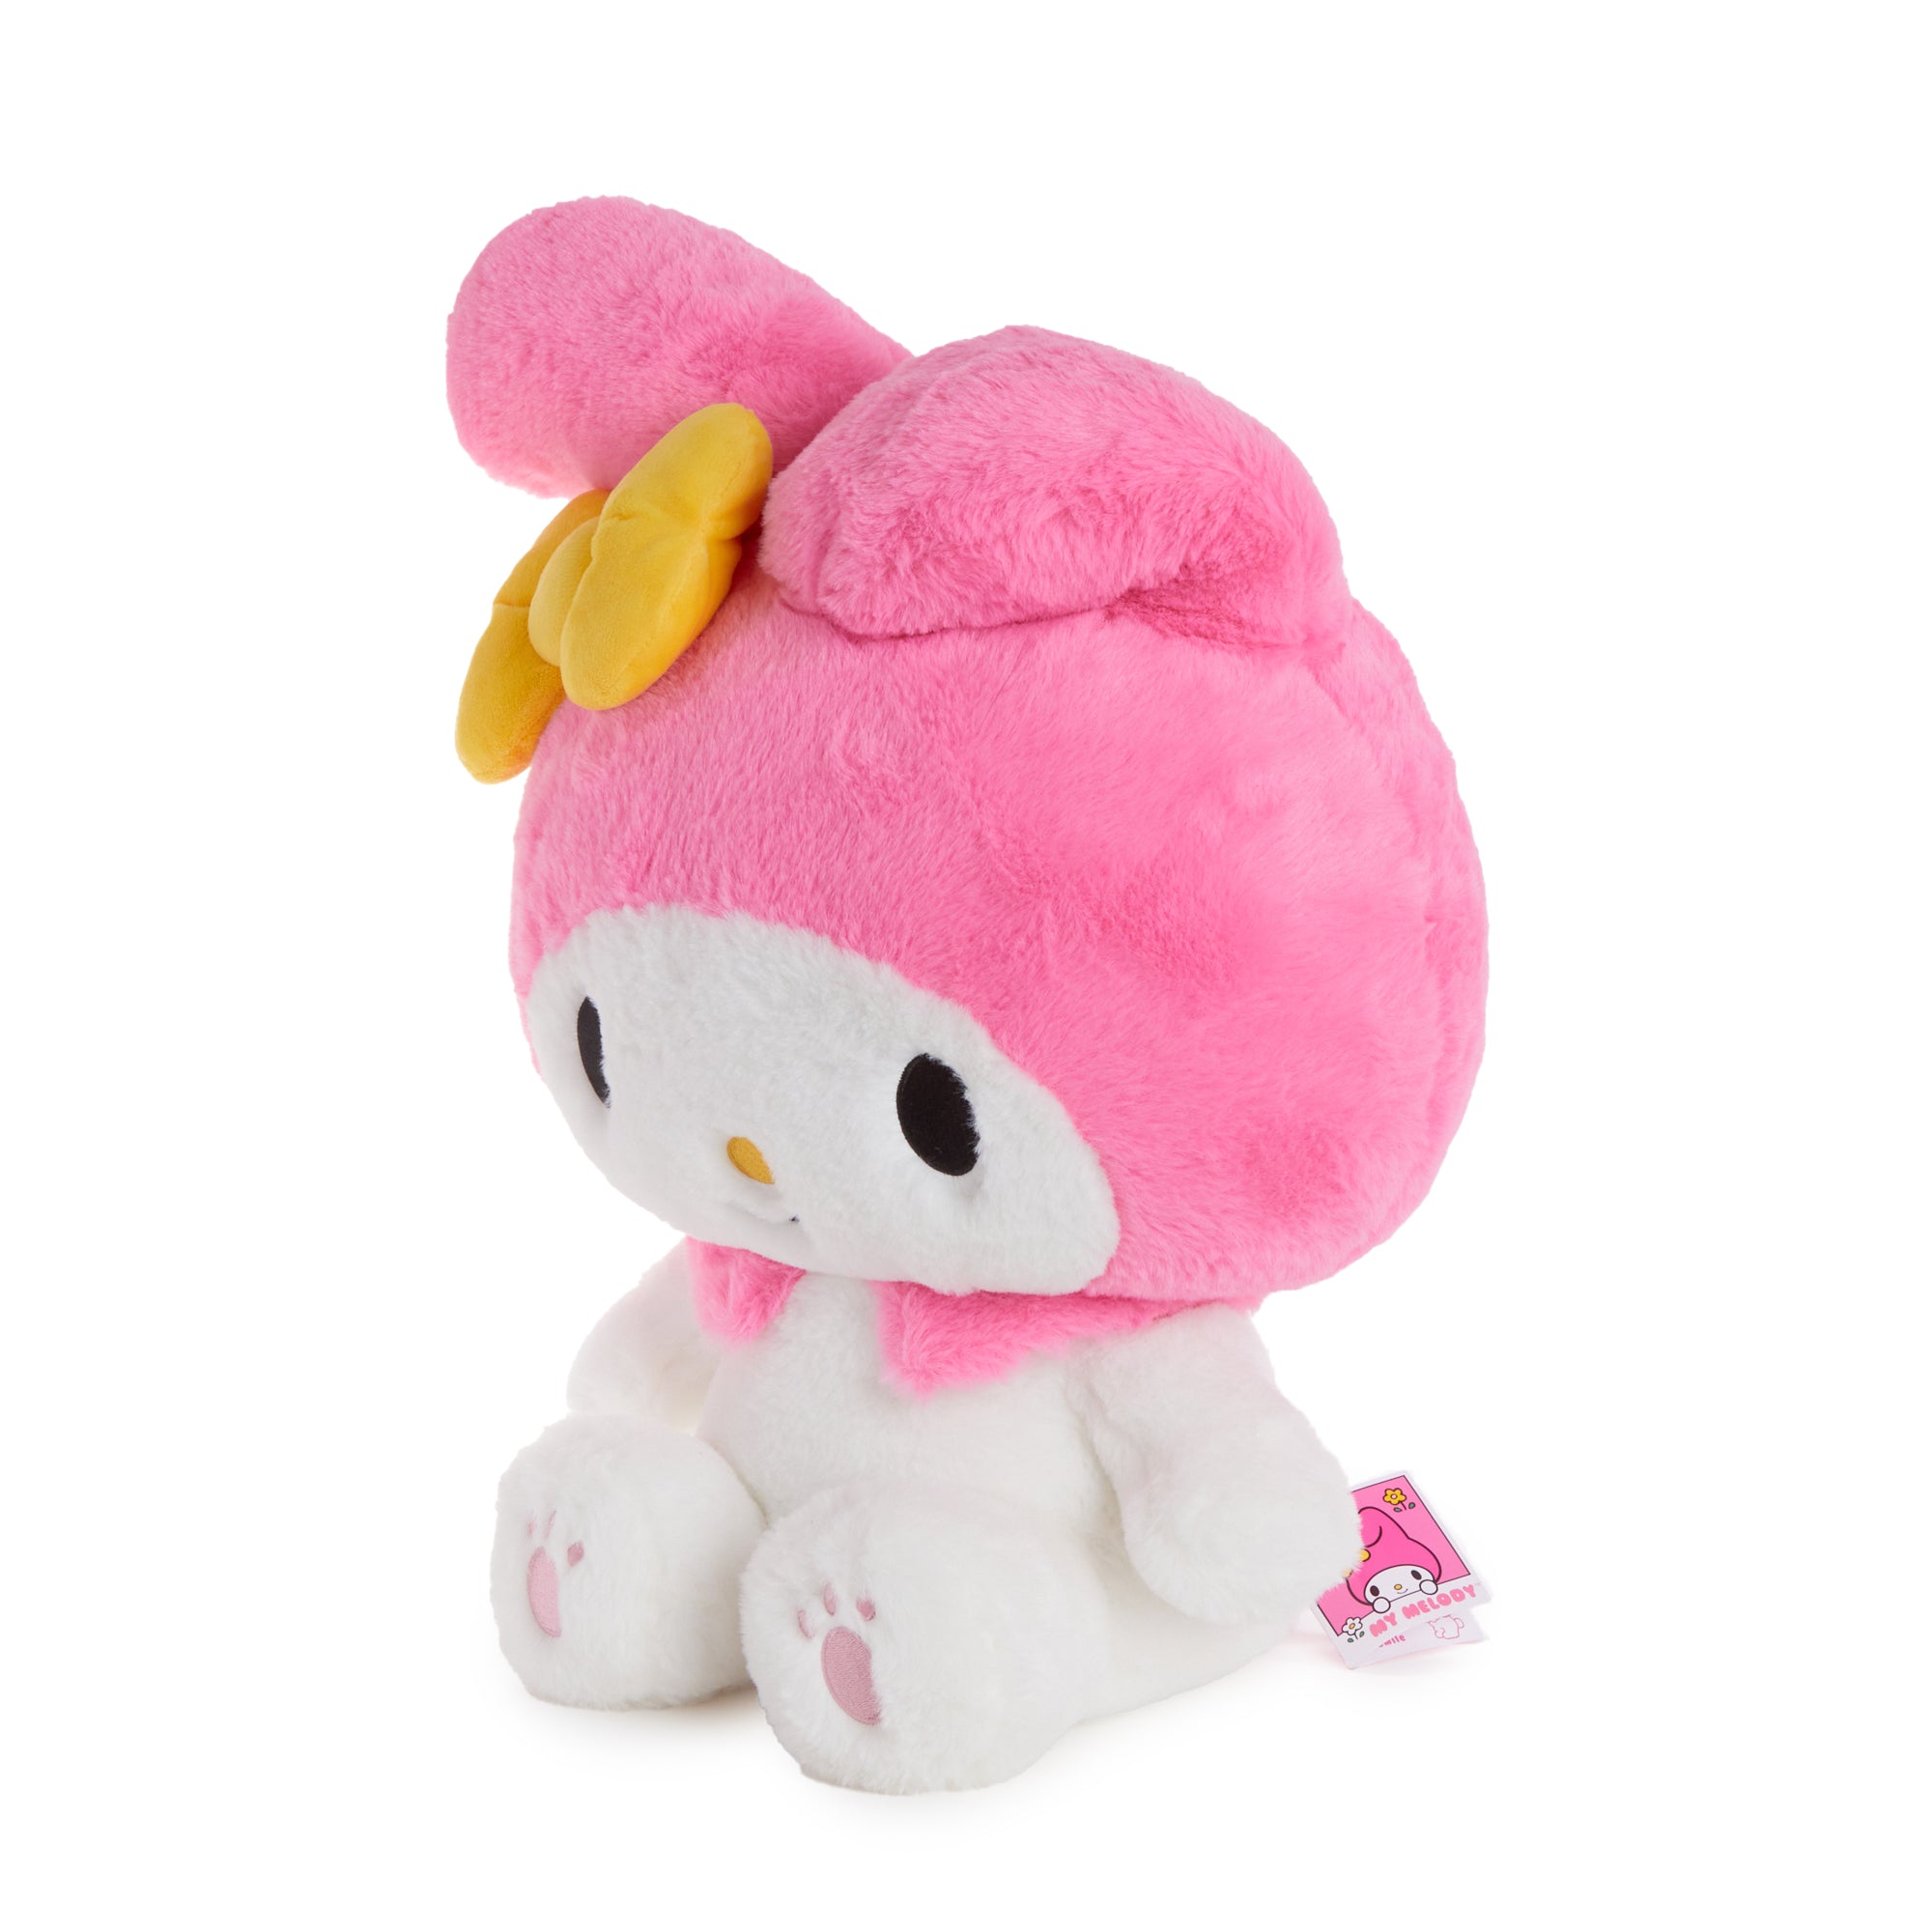 Sanrio Characters Evergreen Classic 10 Plush My Melody